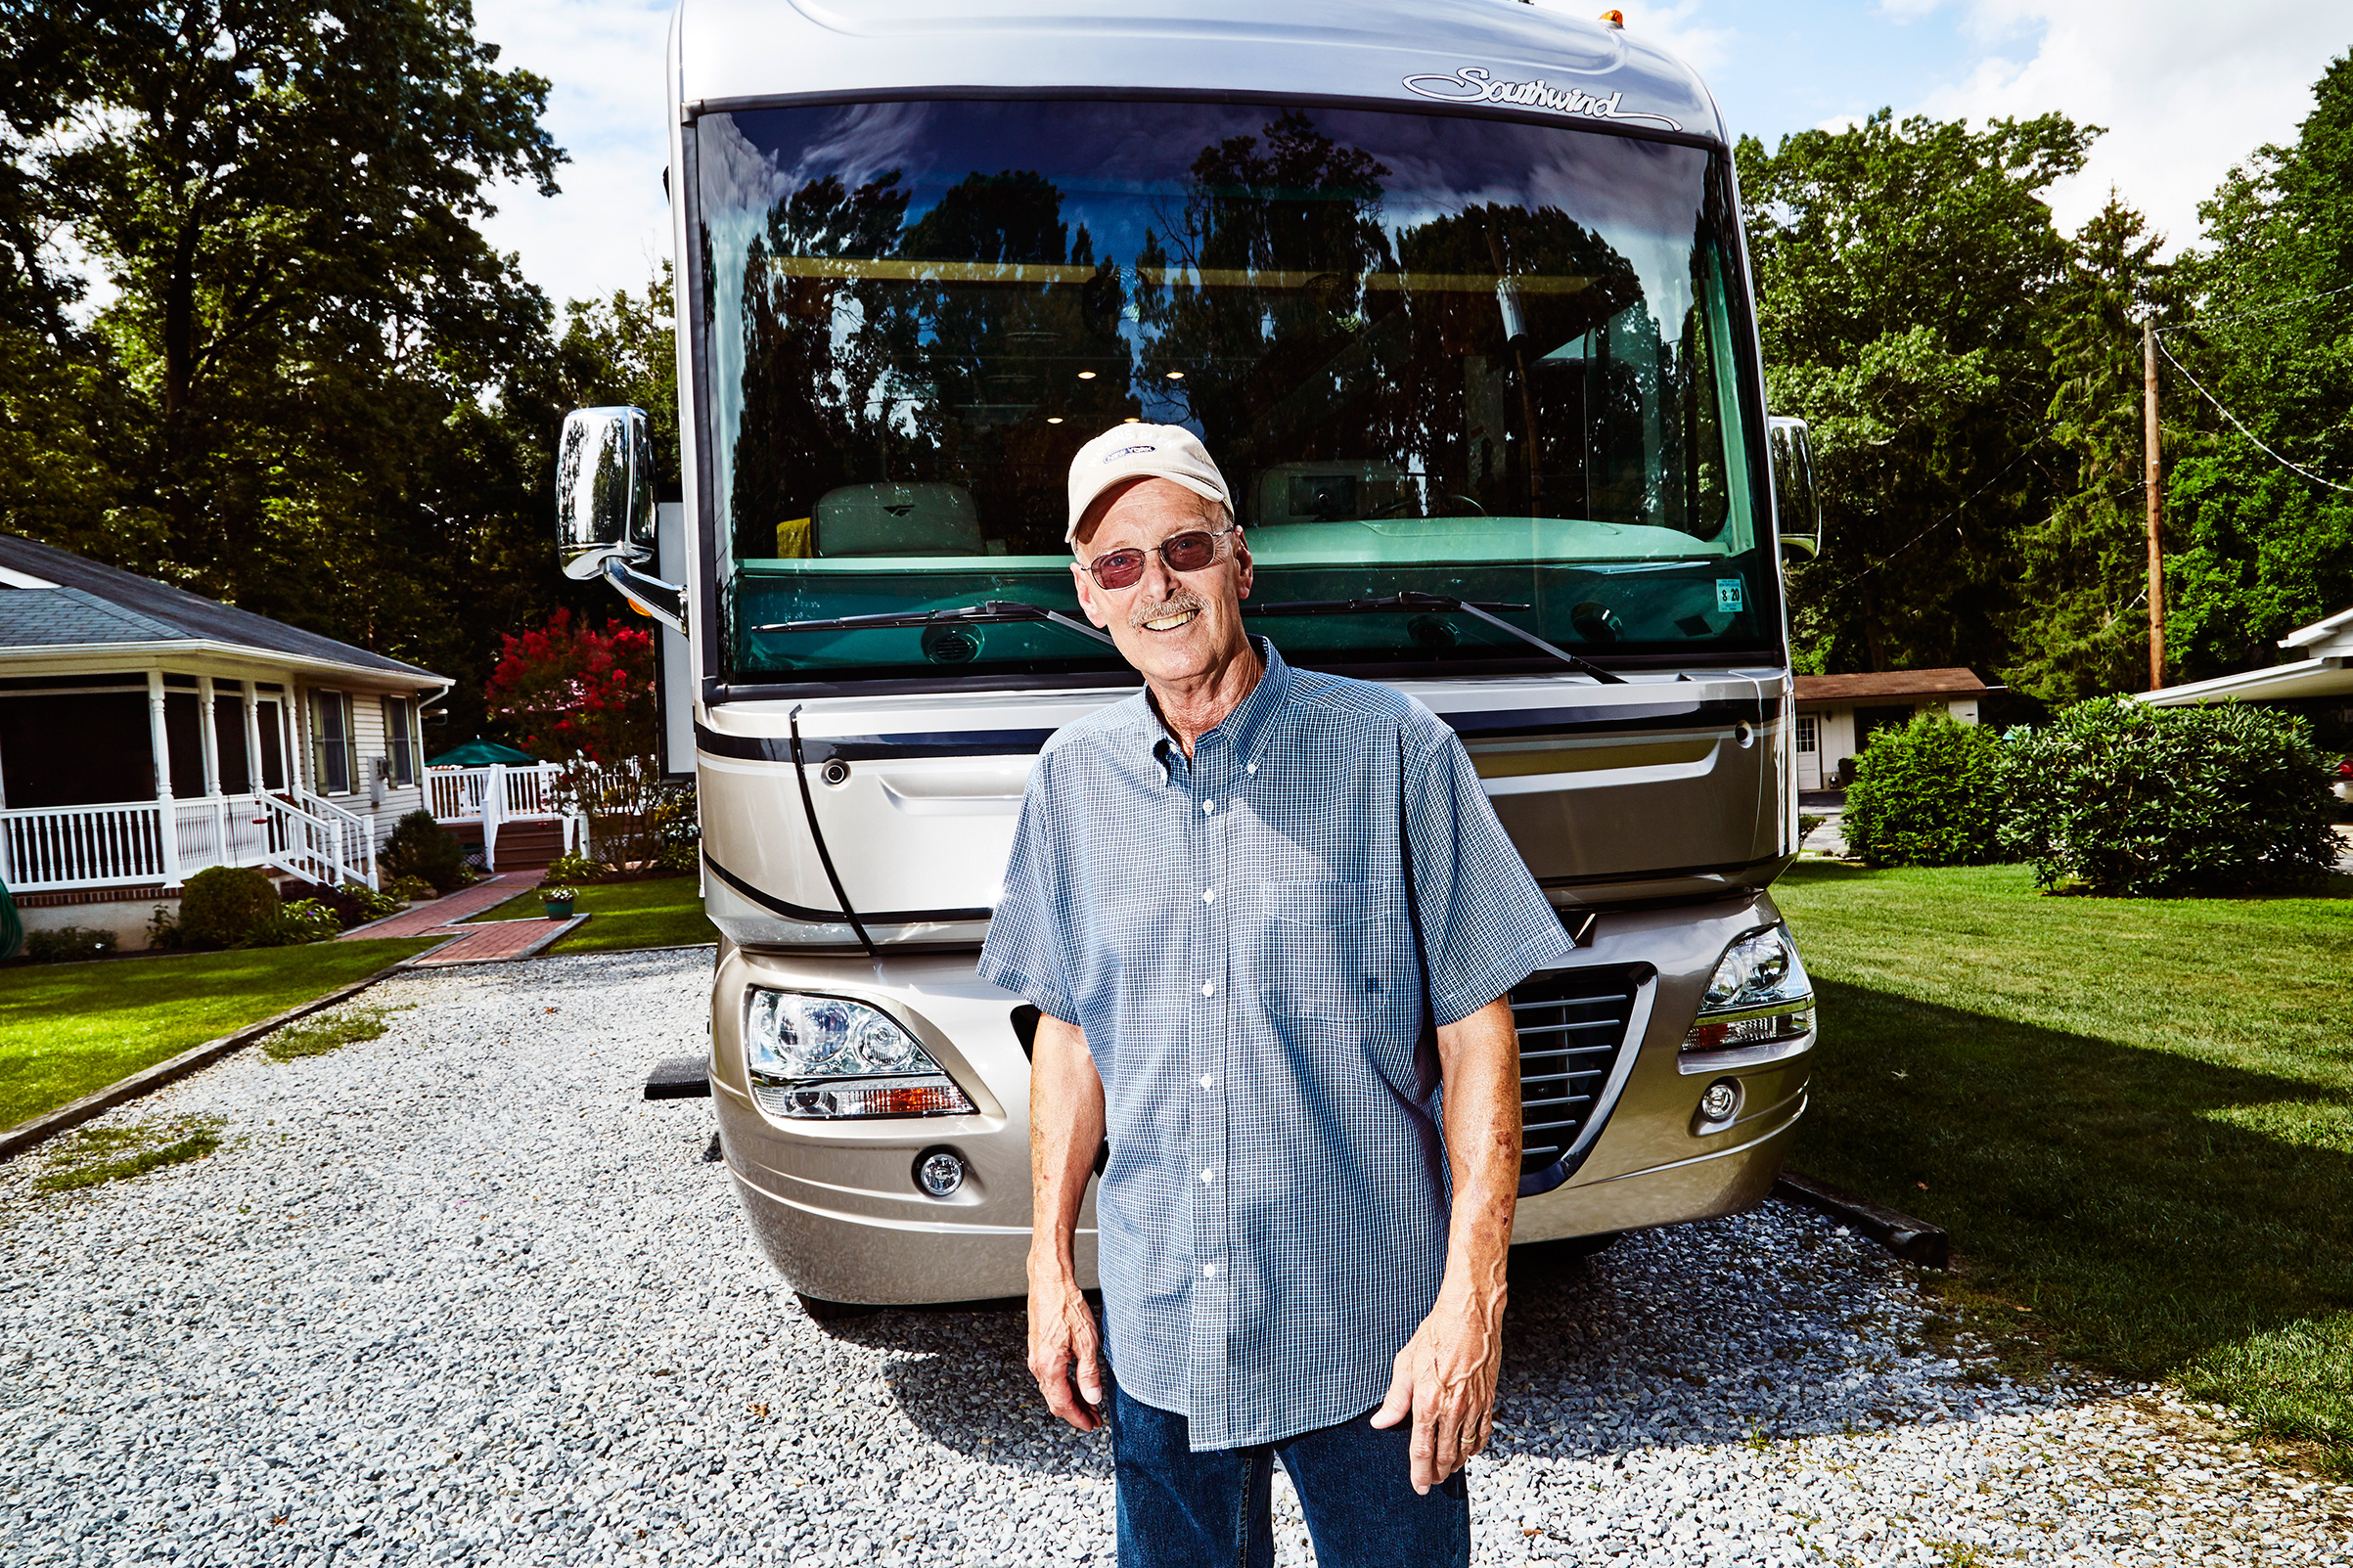 Bill Ludwig with his prized RV (Amy Lombard for TIME)